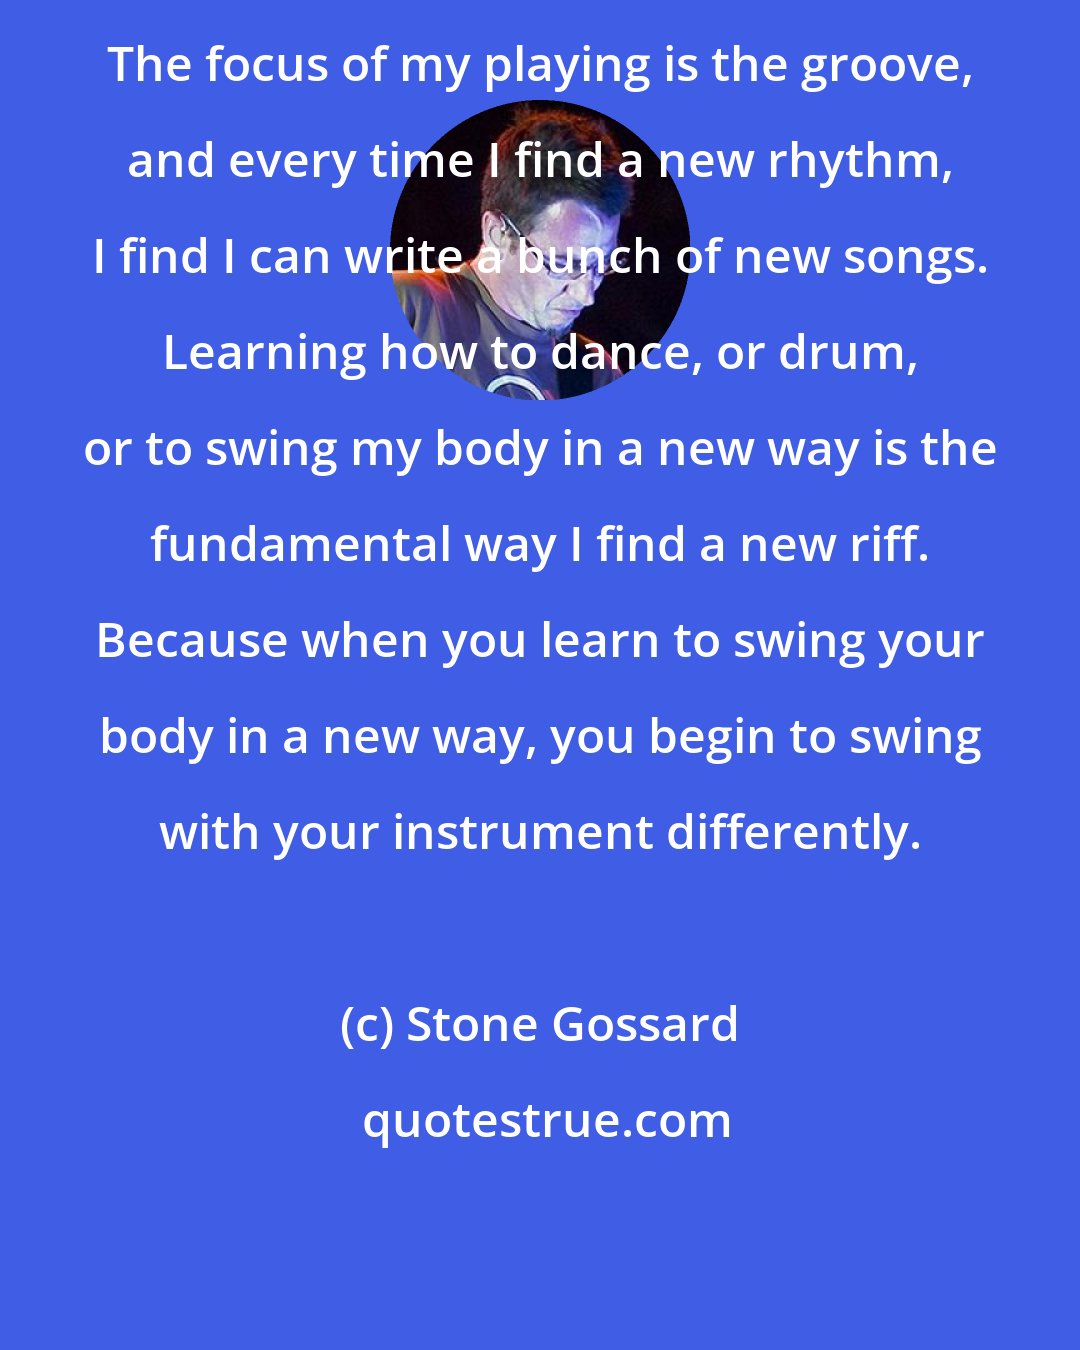 Stone Gossard: The focus of my playing is the groove, and every time I find a new rhythm, I find I can write a bunch of new songs. Learning how to dance, or drum, or to swing my body in a new way is the fundamental way I find a new riff. Because when you learn to swing your body in a new way, you begin to swing with your instrument differently.